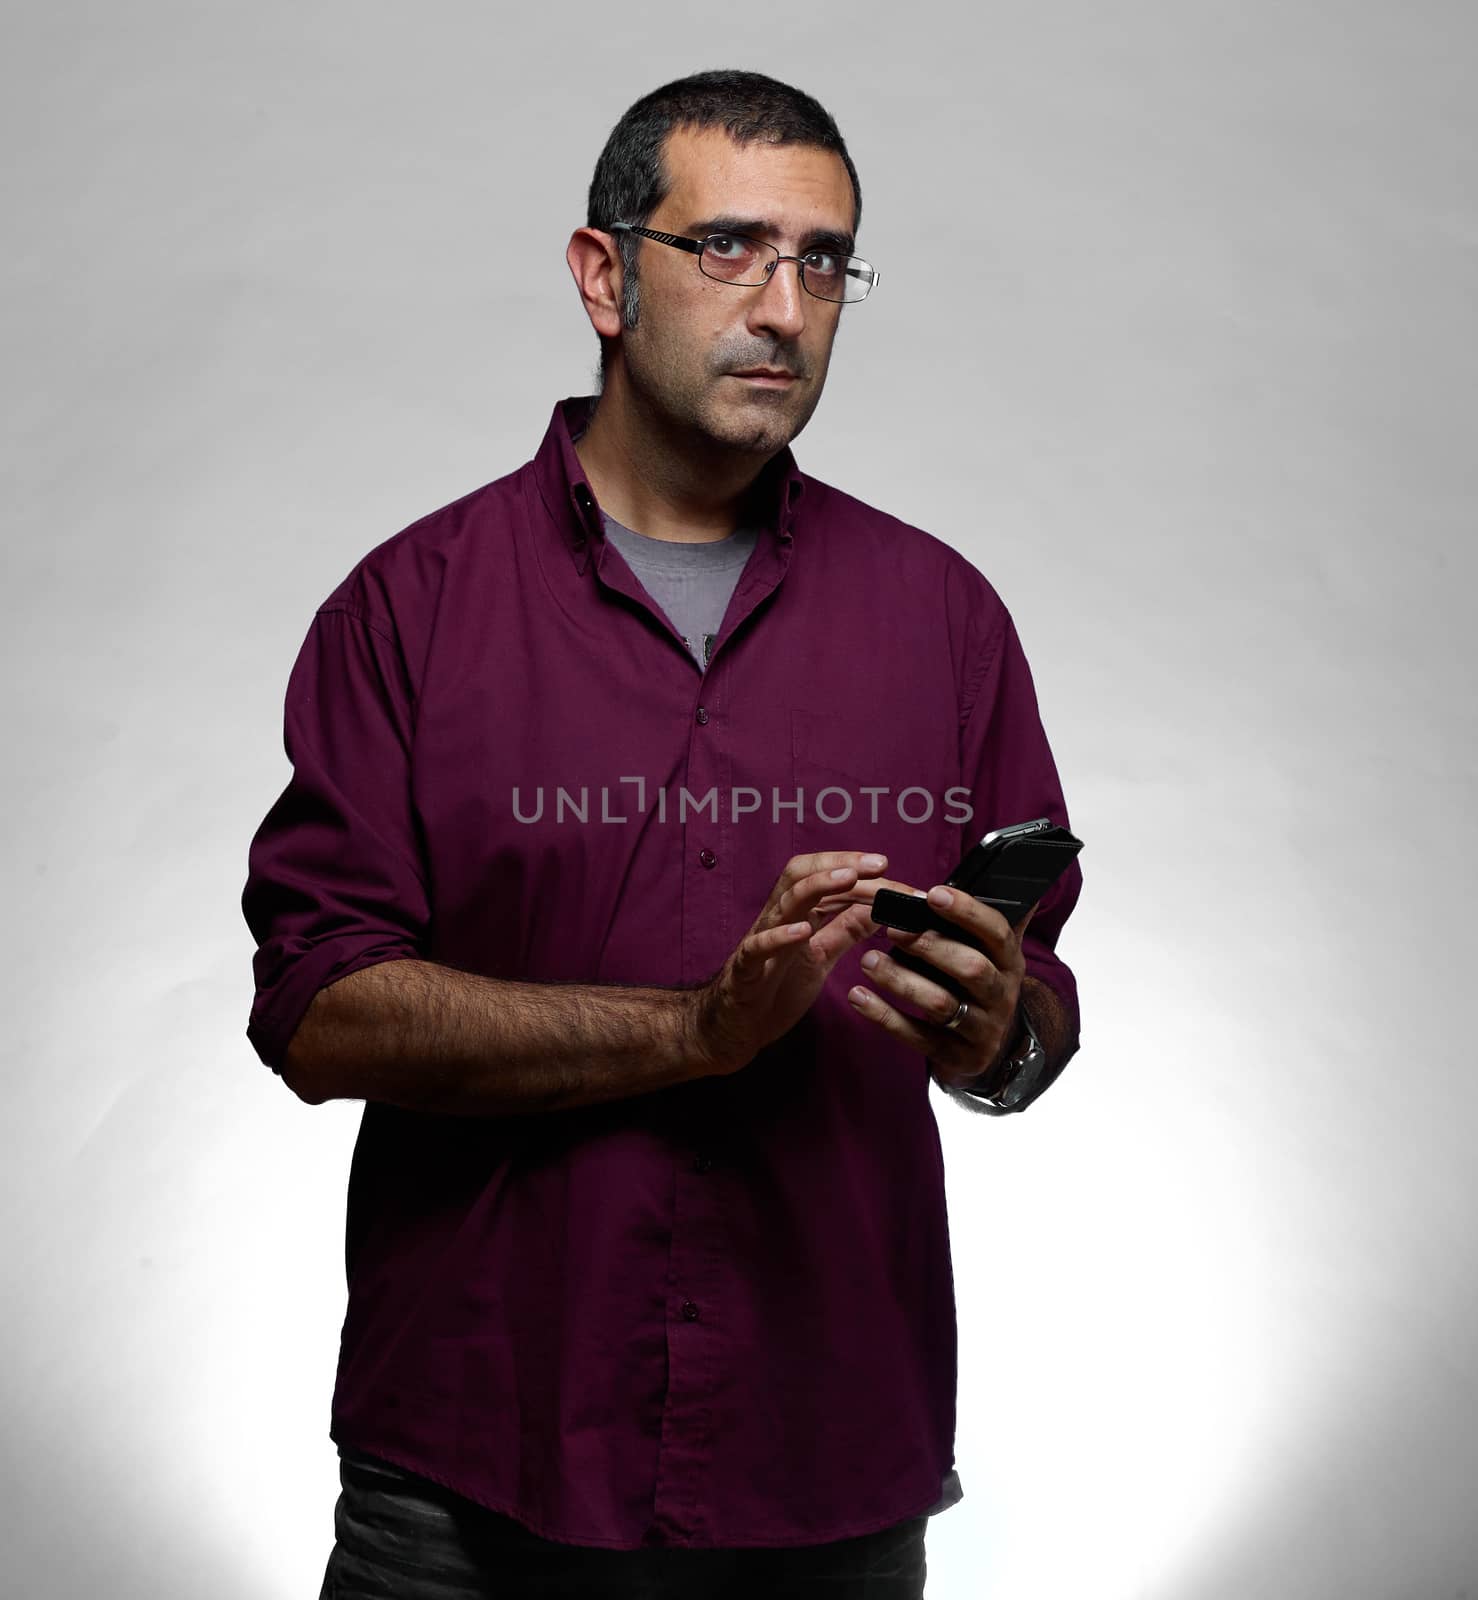 Man in Purple Shirt by goghy73